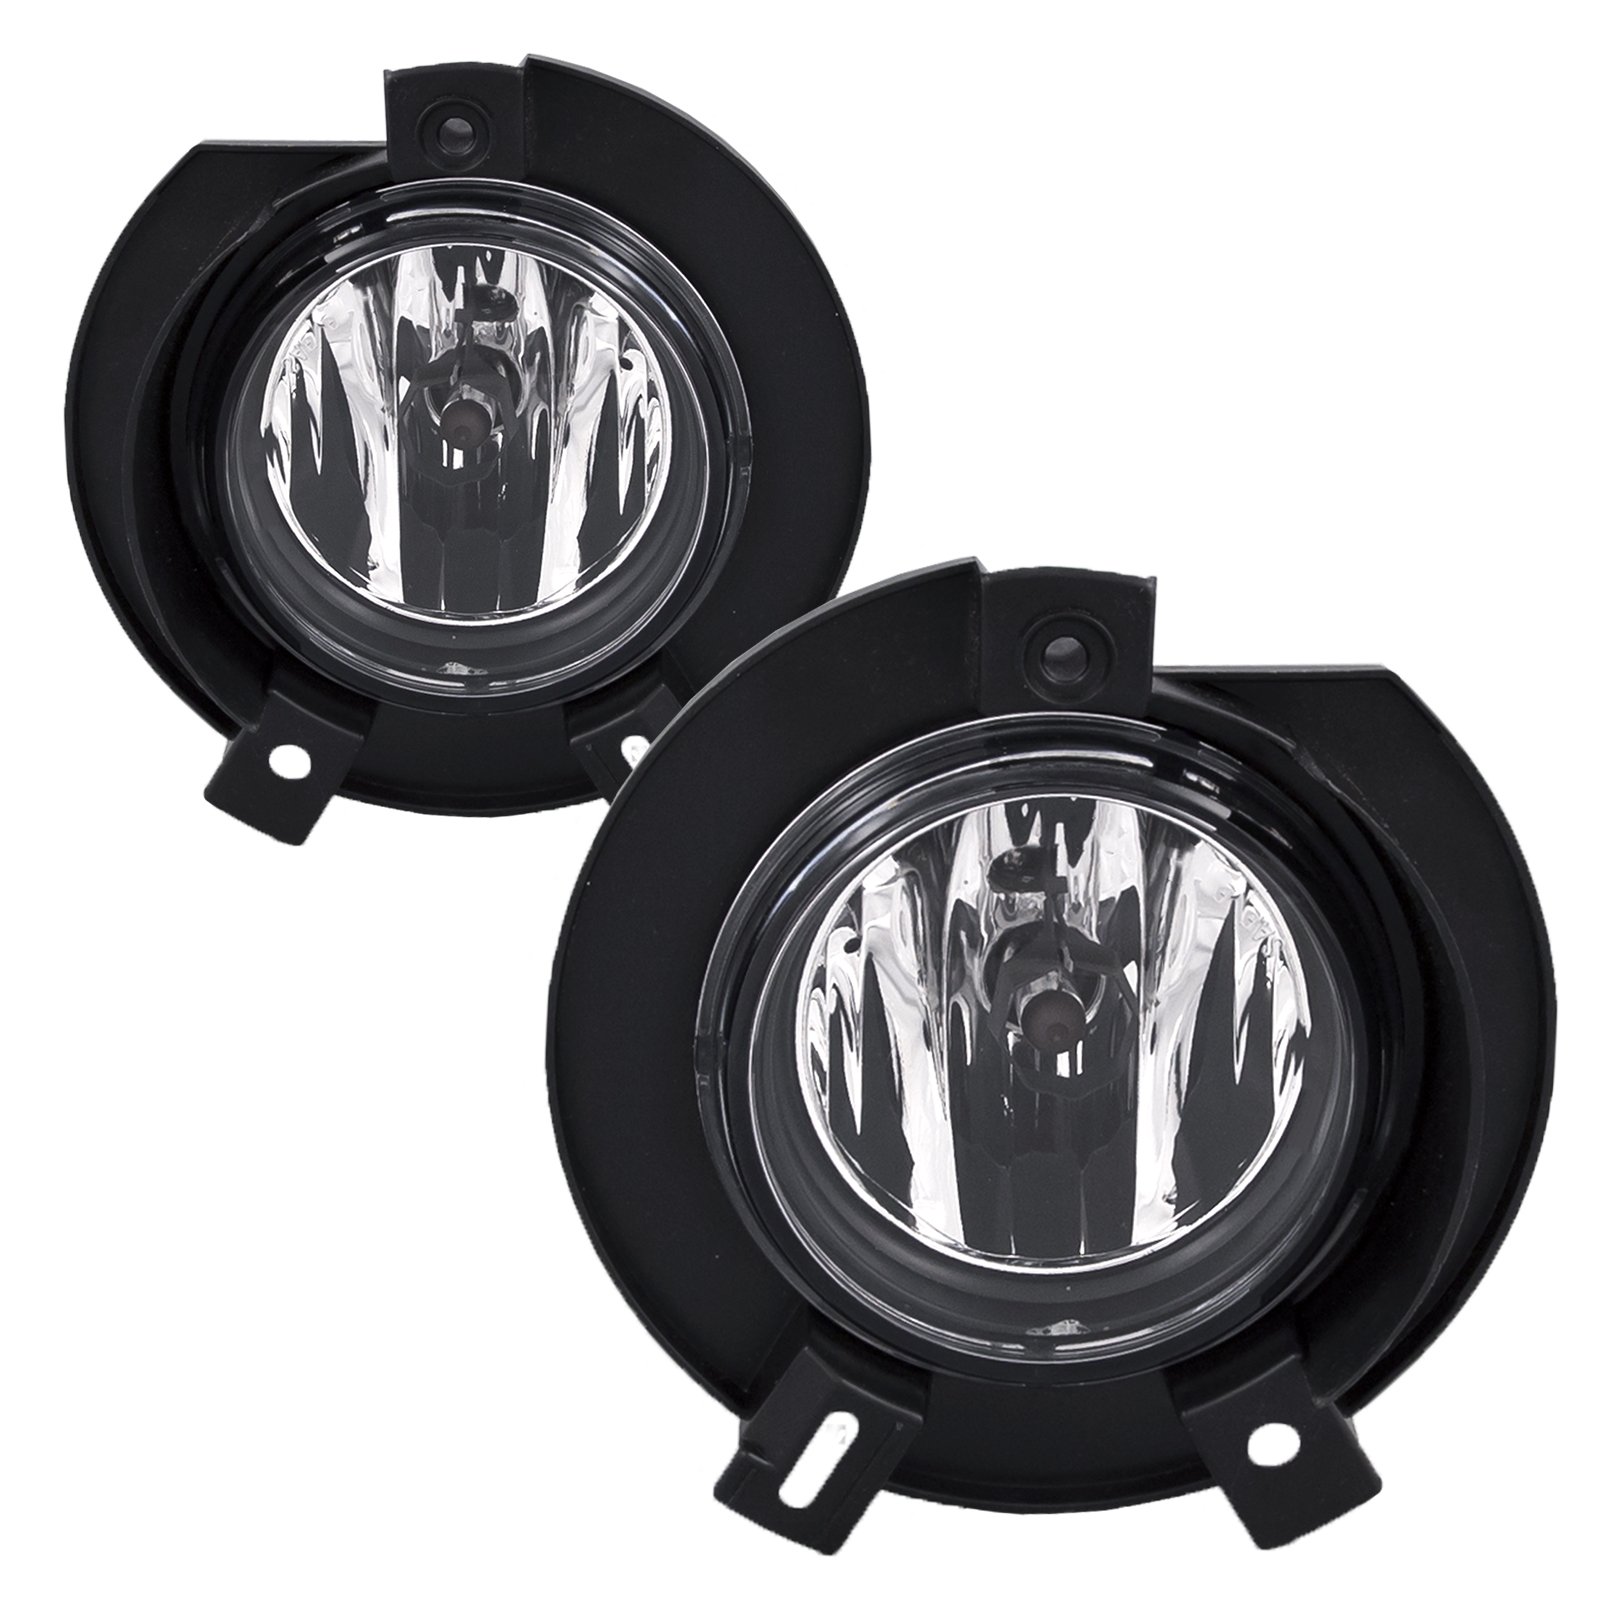 Details about  / Fit 01-05 Ford Explorer Sport Trac Pair Fog Light OE Replacement DOT Clear Lens